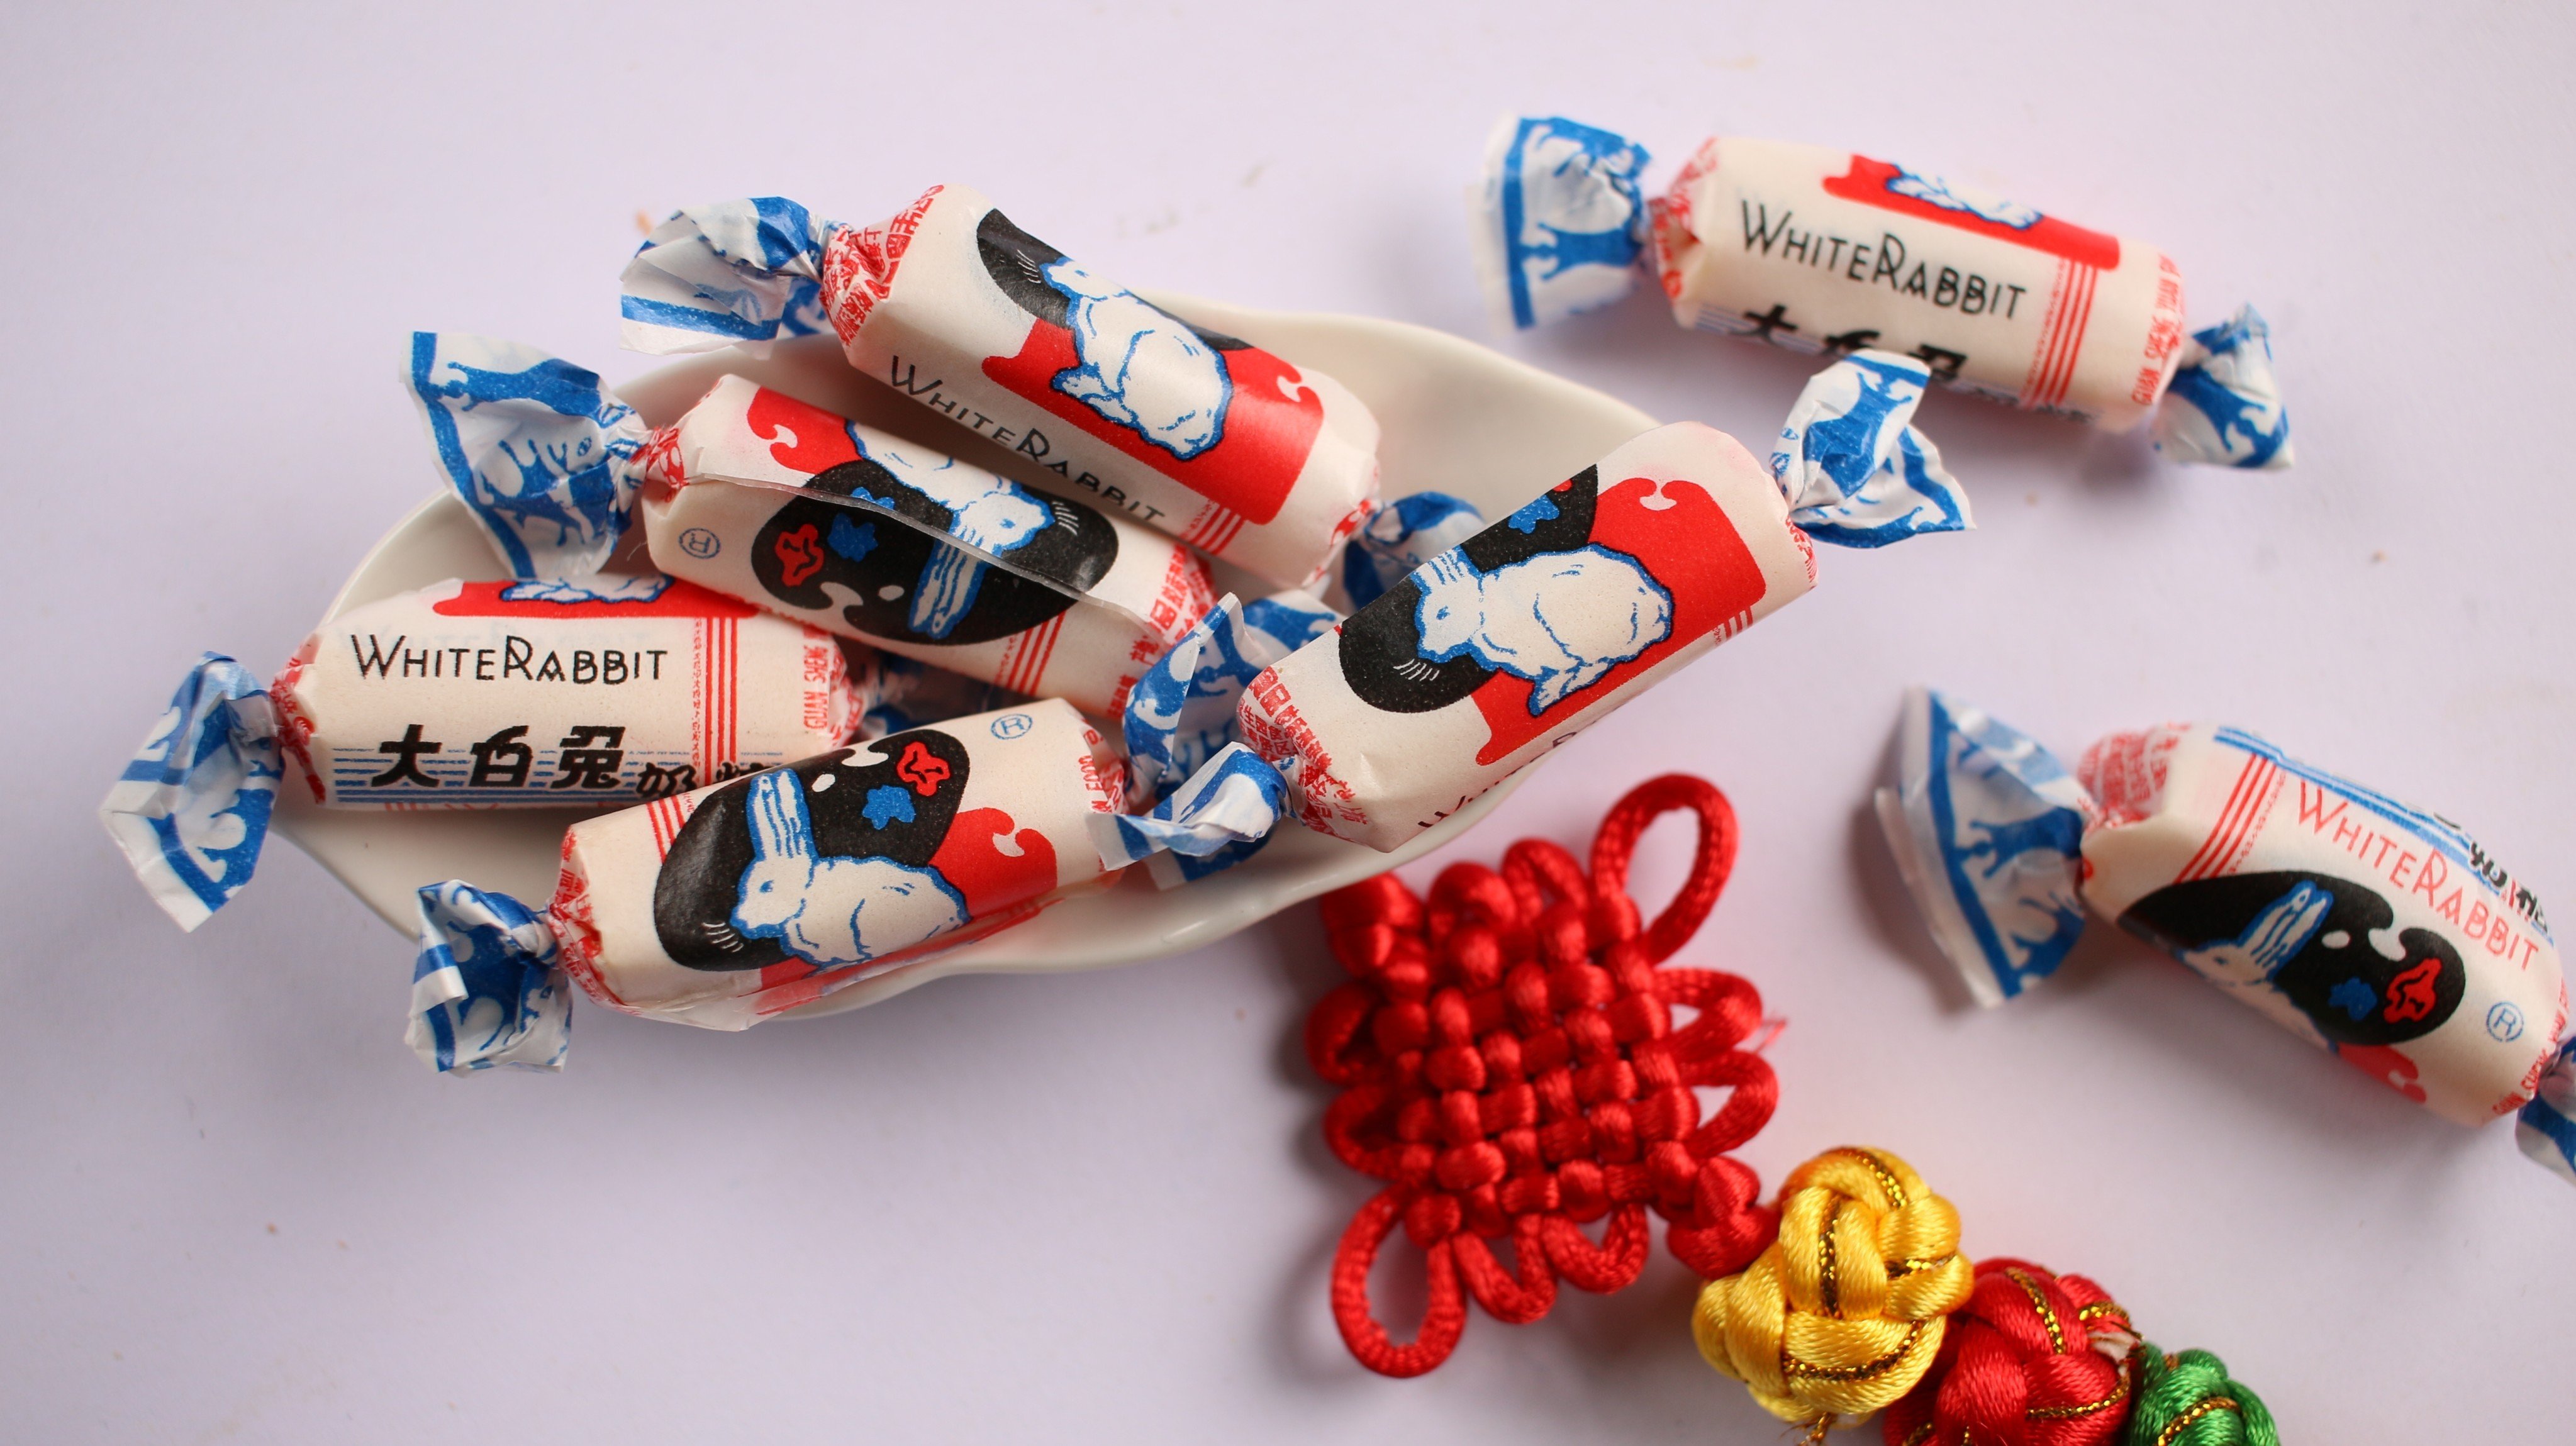 White Rabbit Creamy Candy is commonly eaten in Hong Kong around Lunar New Year. We look at these and other sweet treats popular over the holidays, and their origins. Photo: Shutterstock